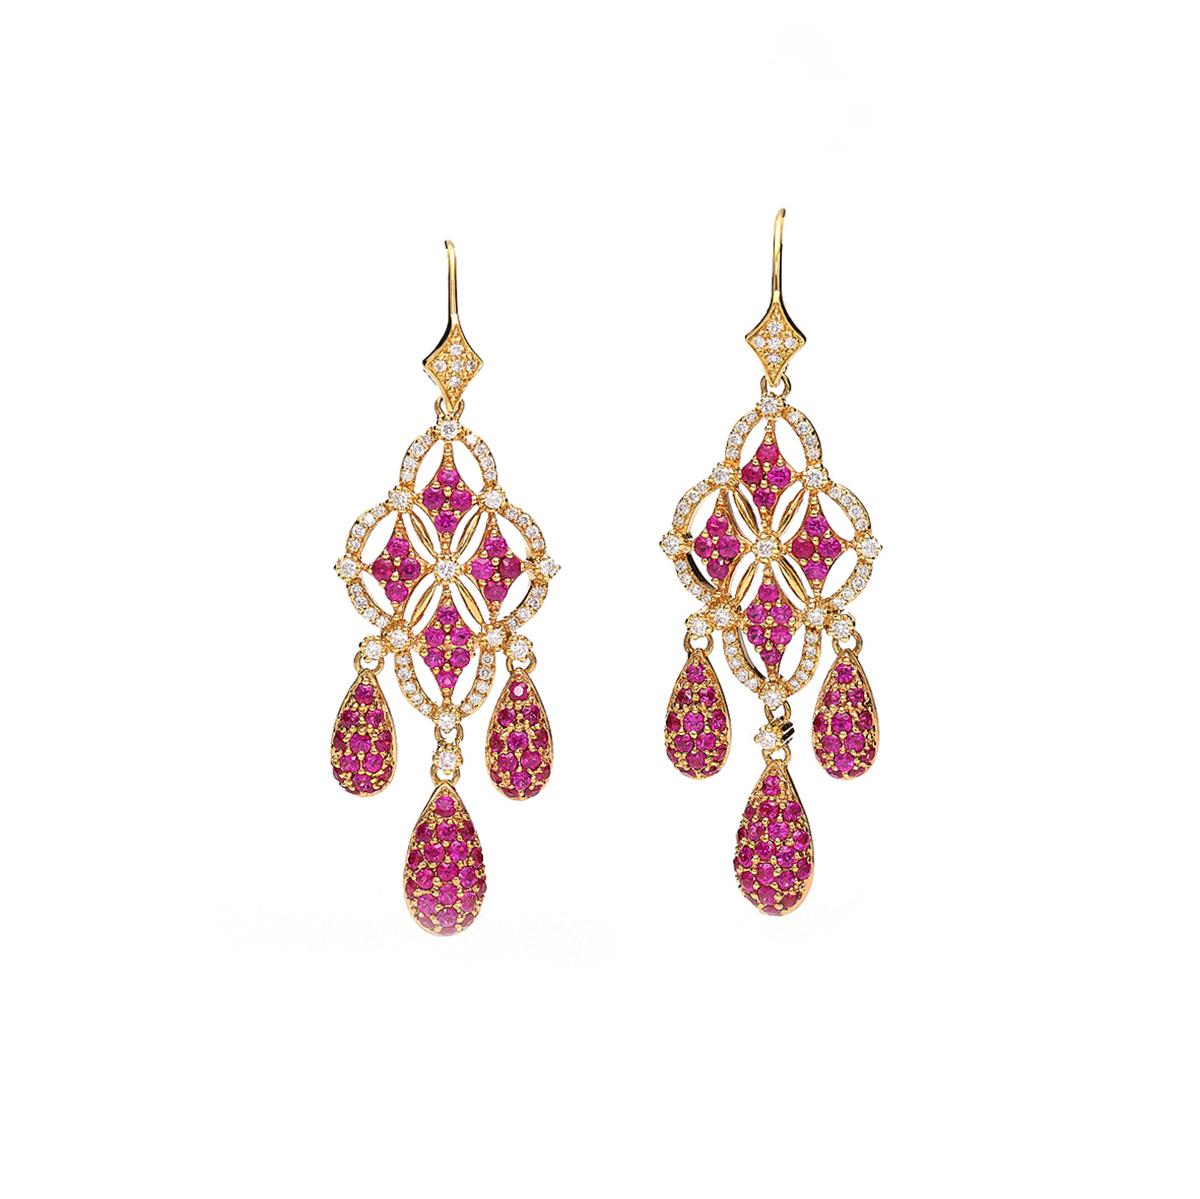 Contemporary Diamond Earrings with Rubies For Sale